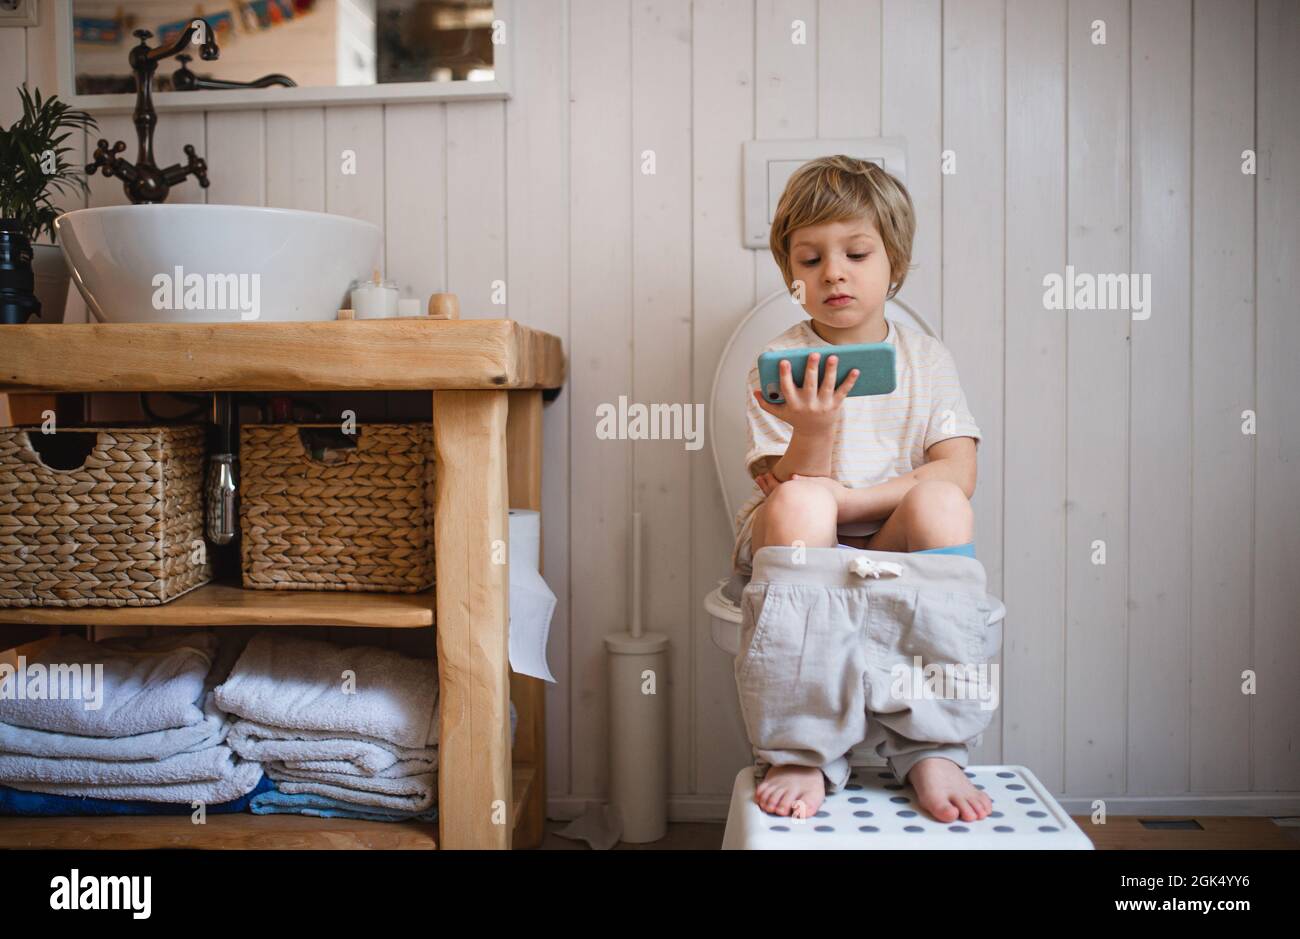 Portrait of cute small boy sitting on toilet indoors at home, using smartphone. Stock Photo